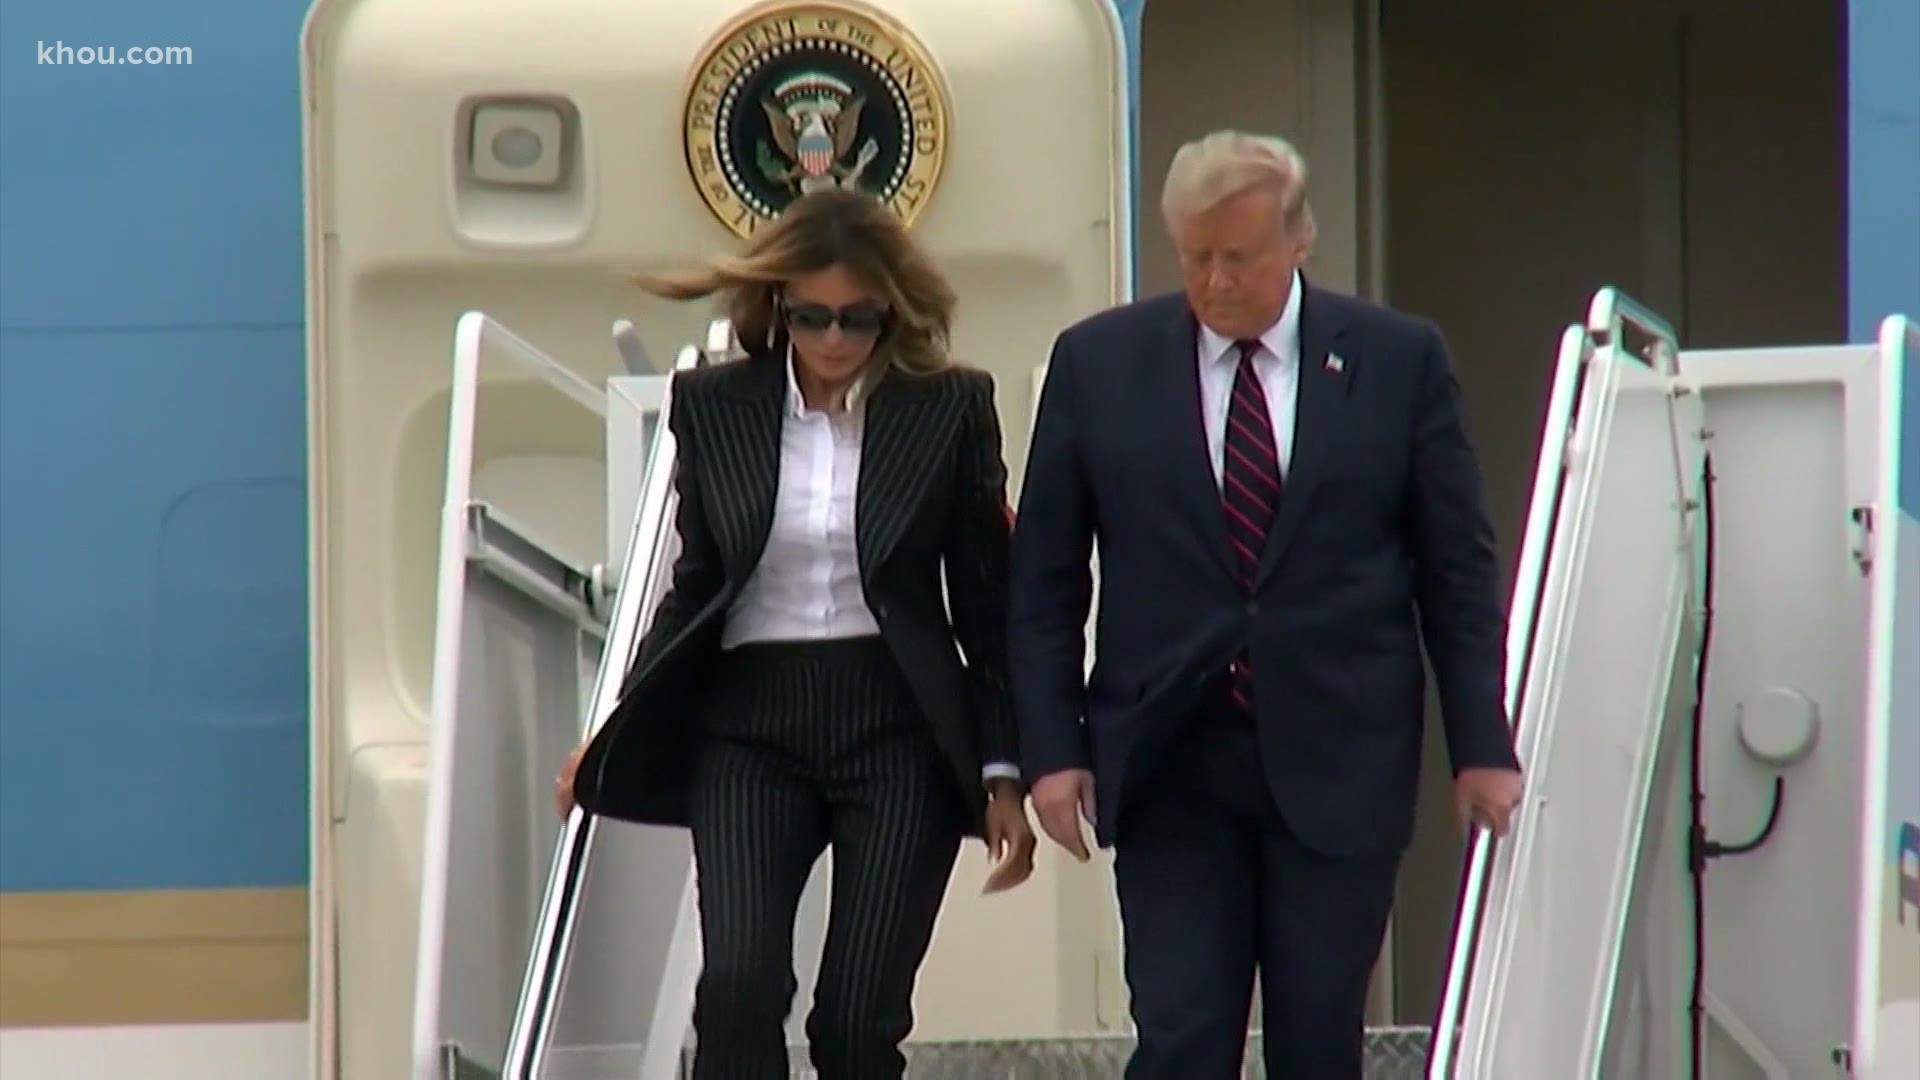 The world woke up Friday to news that President Trump and first lady Melania Trump were diagnosed with COVID-19.